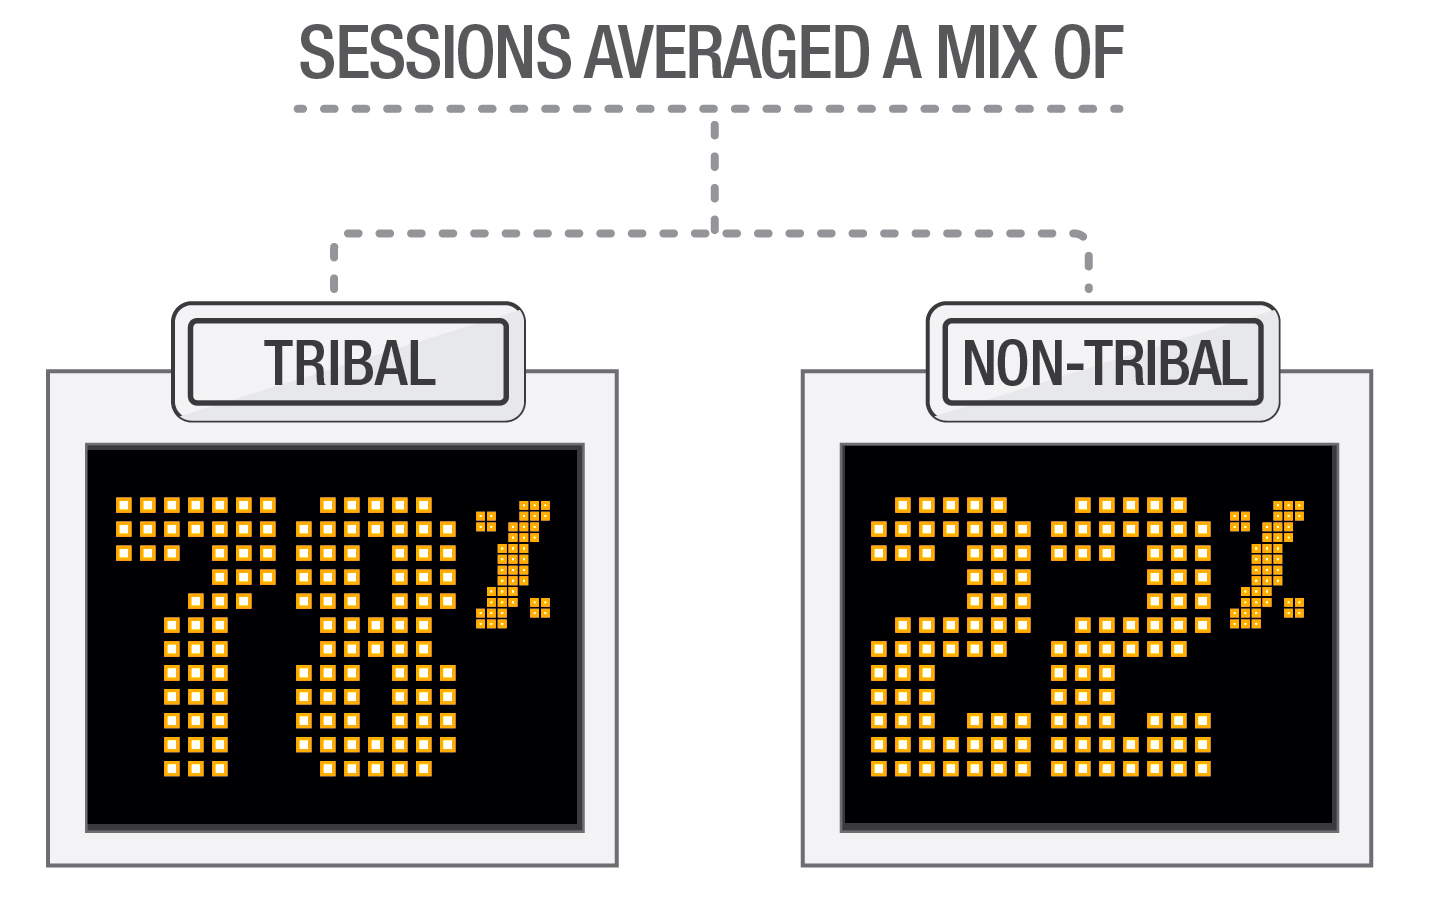 Picture image showing the number of training session participants tribal versus non-tribal.